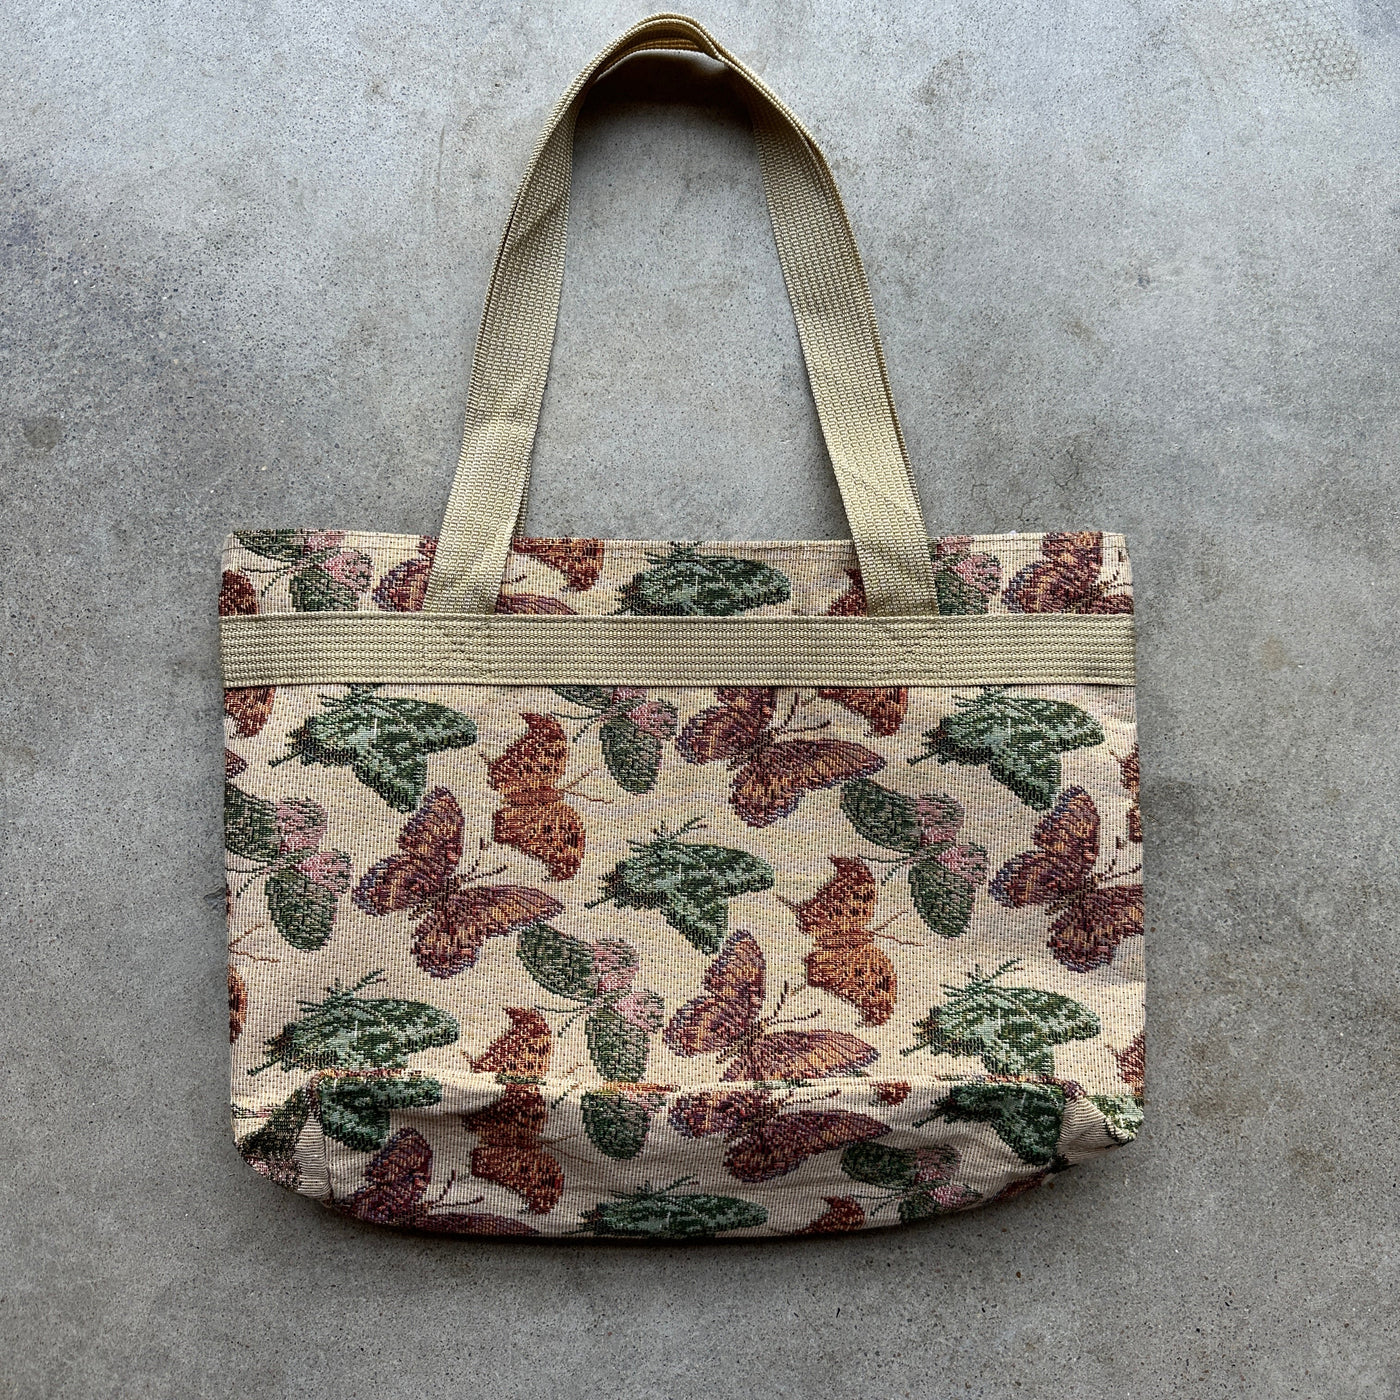 Tan butterfly print large tote bag